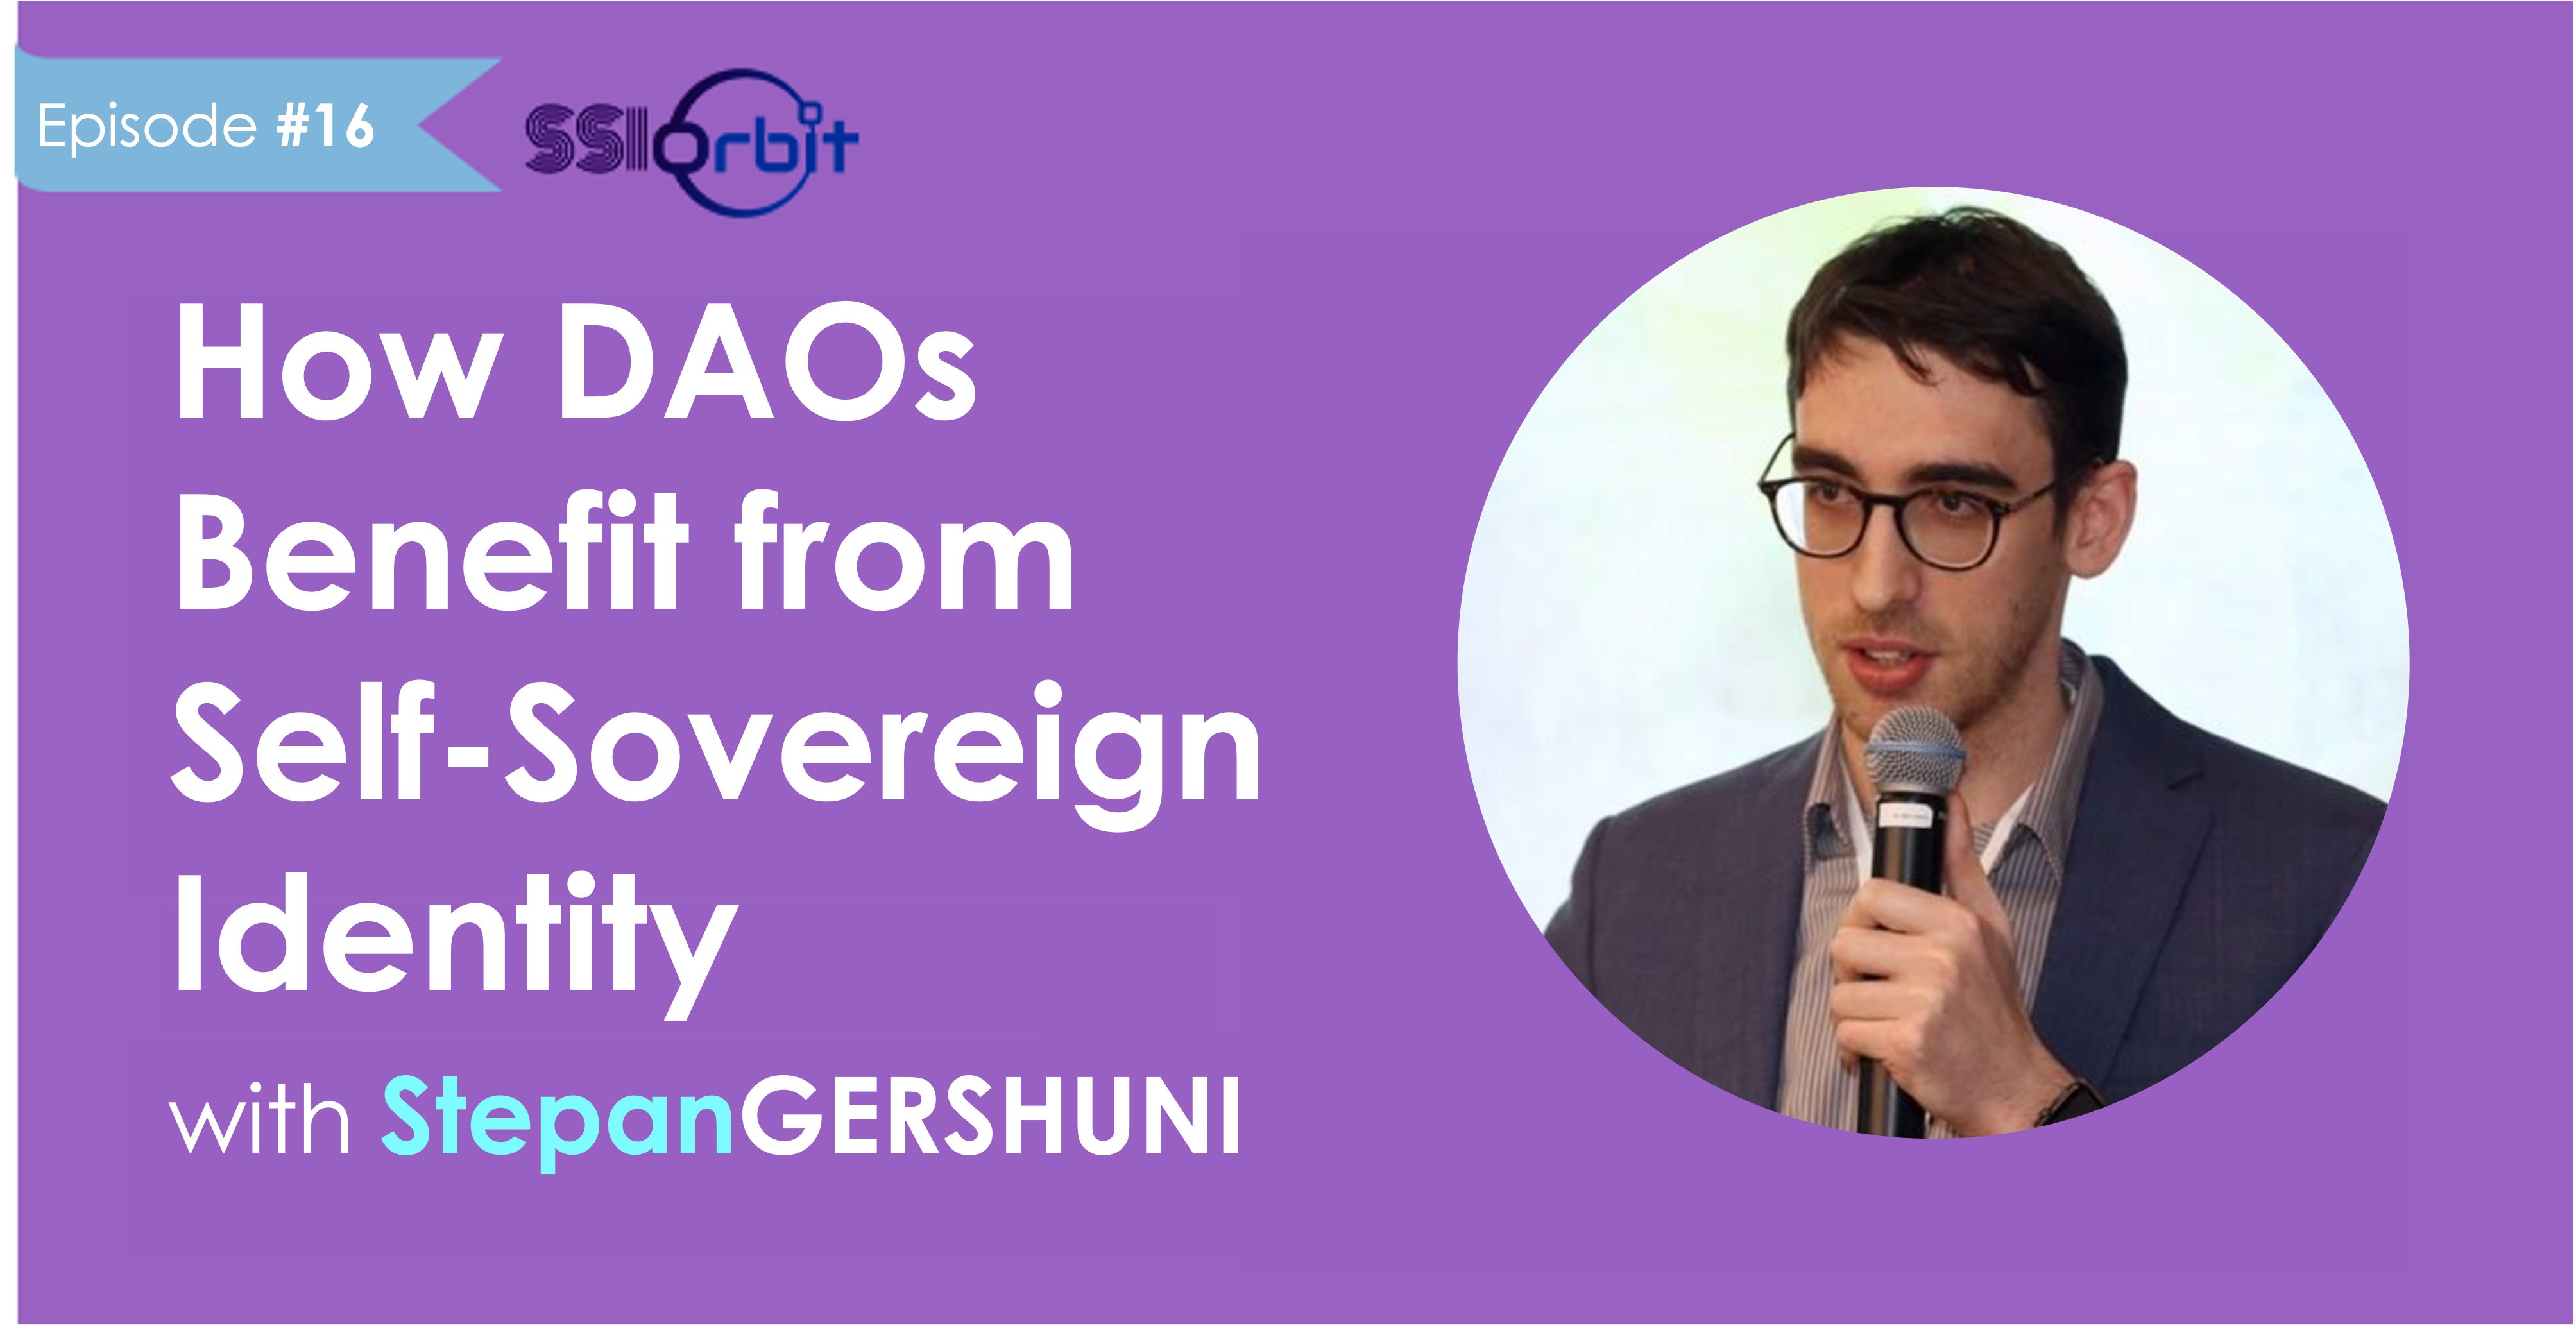 How DAOs Benefit from Self-Sovereign Identity with Stepan Gershuni